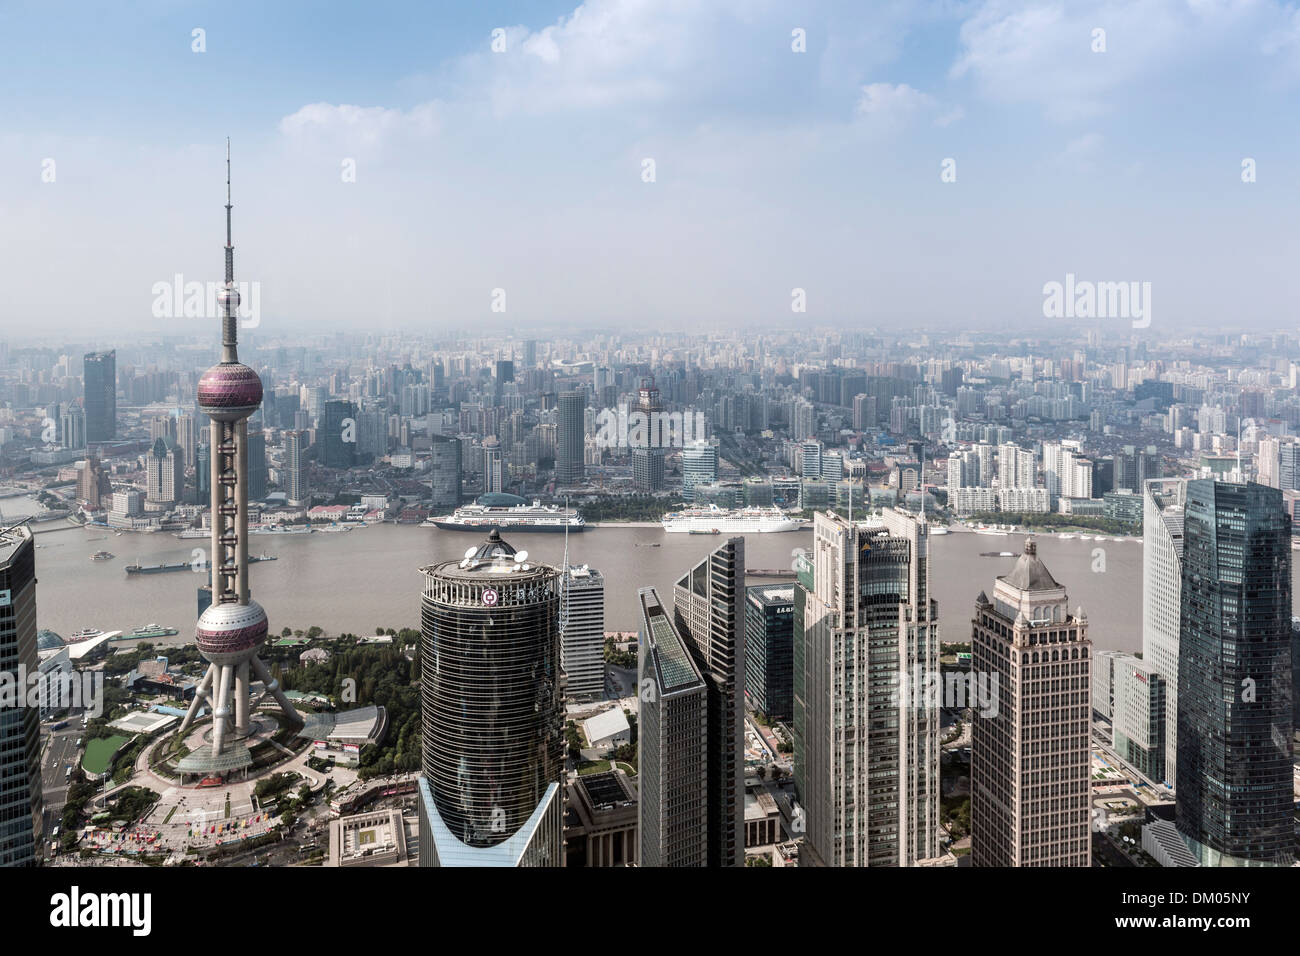 Oriental Pearl Tower, Lujiazui financial district, Pudong, Shanghai, China Stock Photo